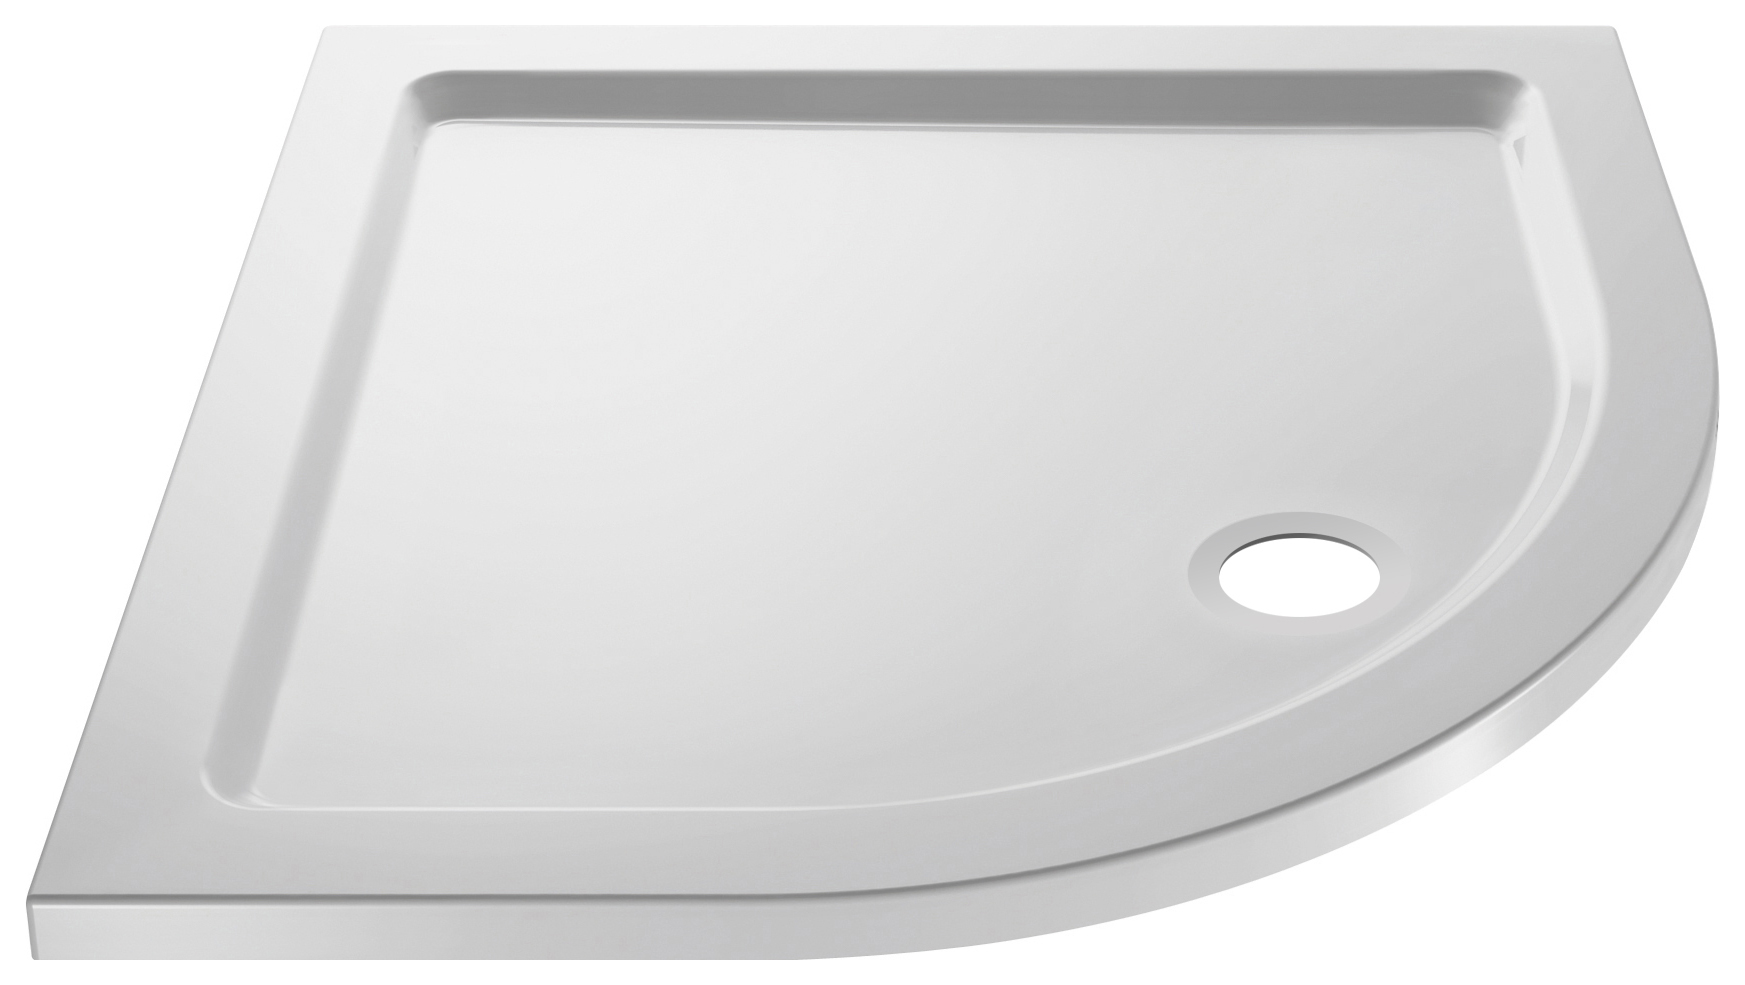 Image of Wickes Quadrant Pearlstone Shower Tray - 800 x 800mm